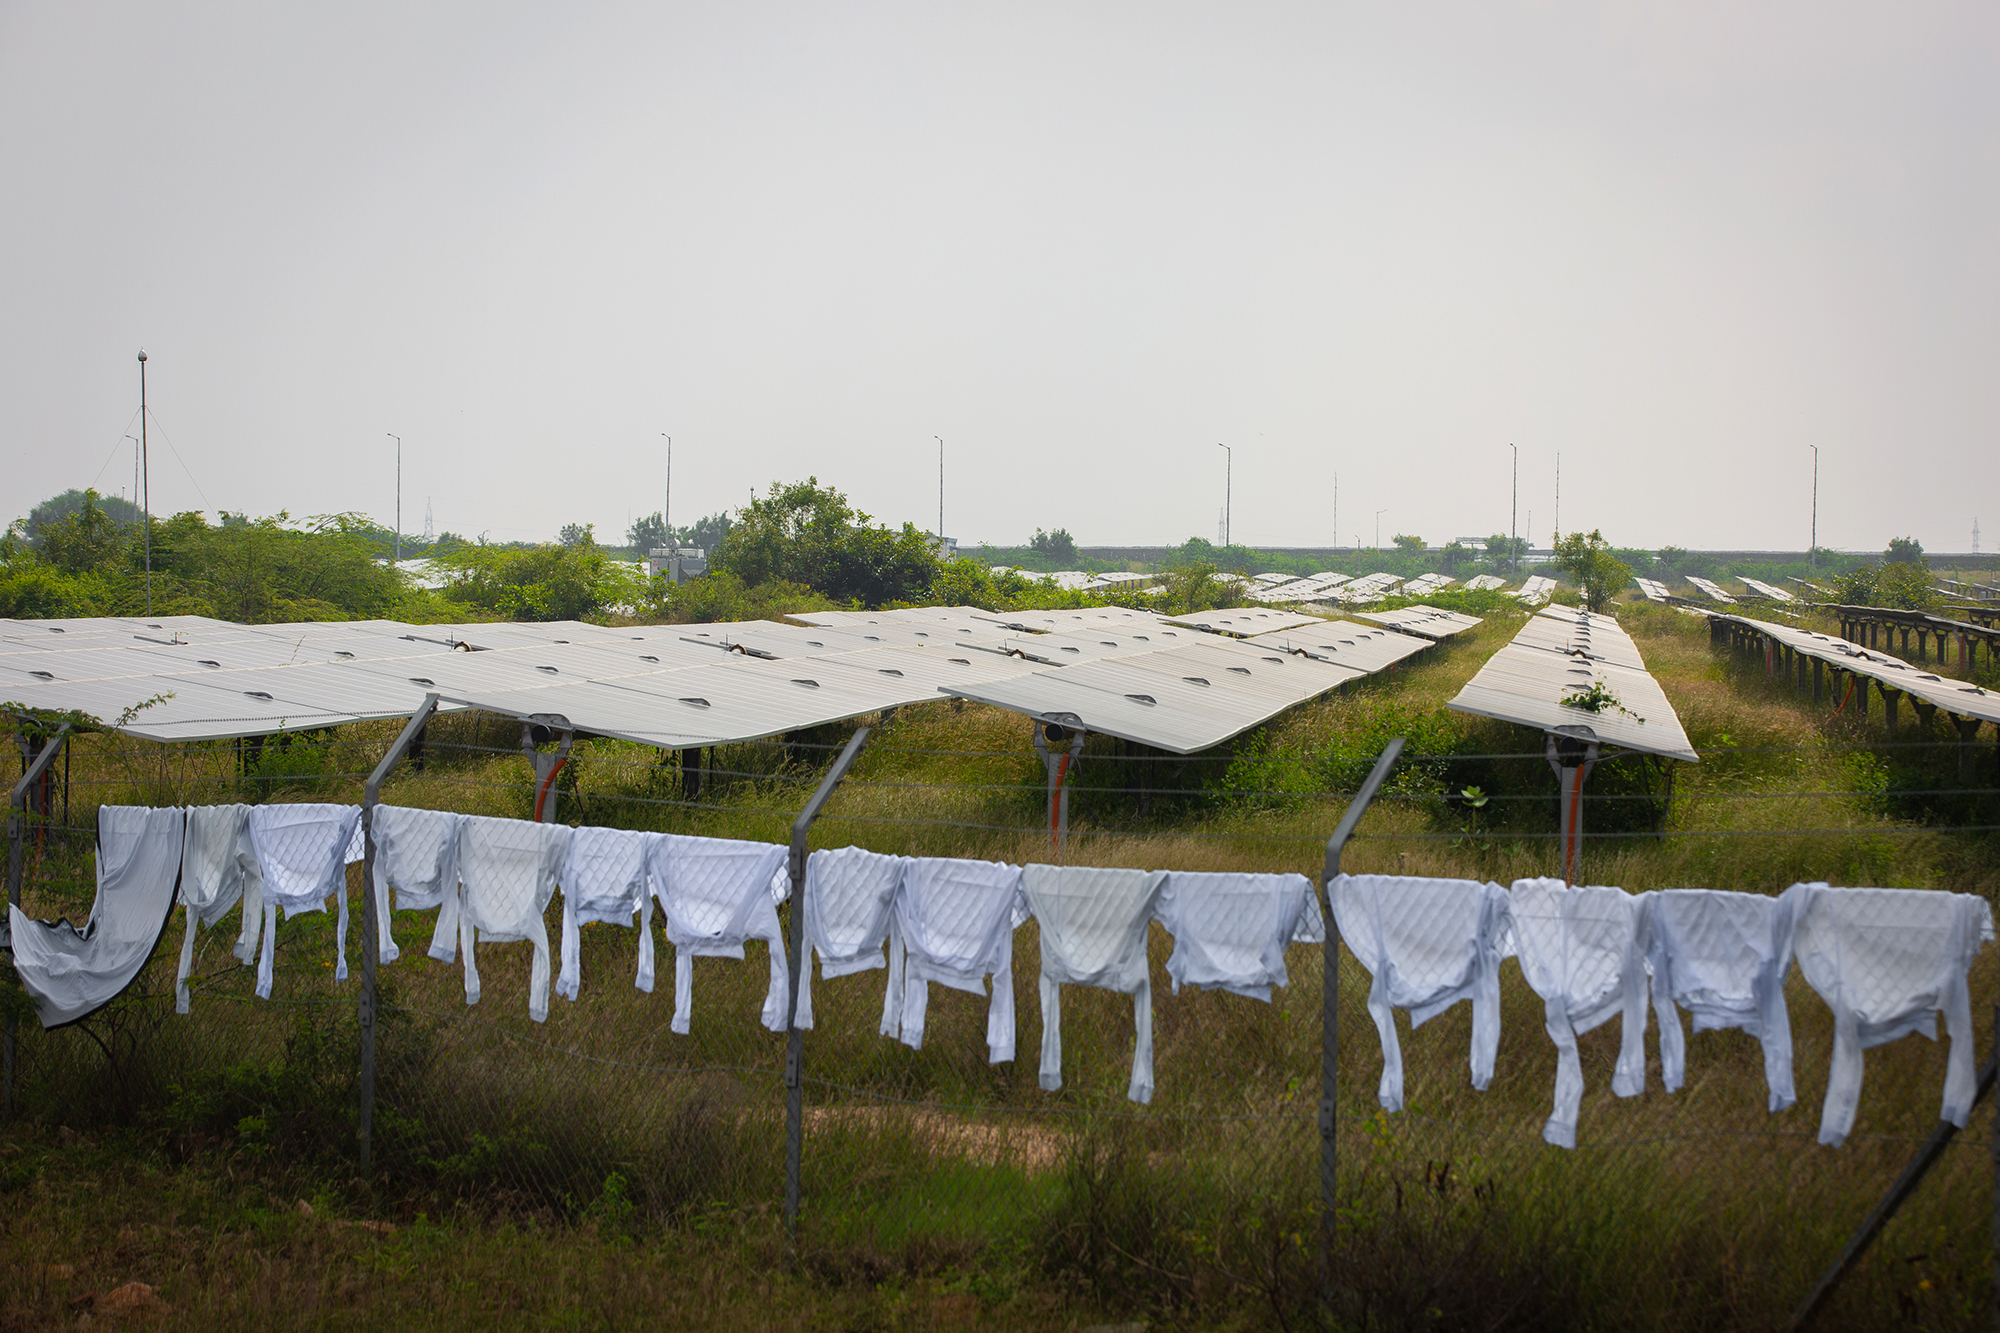 Laundered clothes are left to dry on the fence of the Pavagada Solar Park, one of the largest solar parks in India. Photo by Abhishek N. Chinnappa/Mongabay.